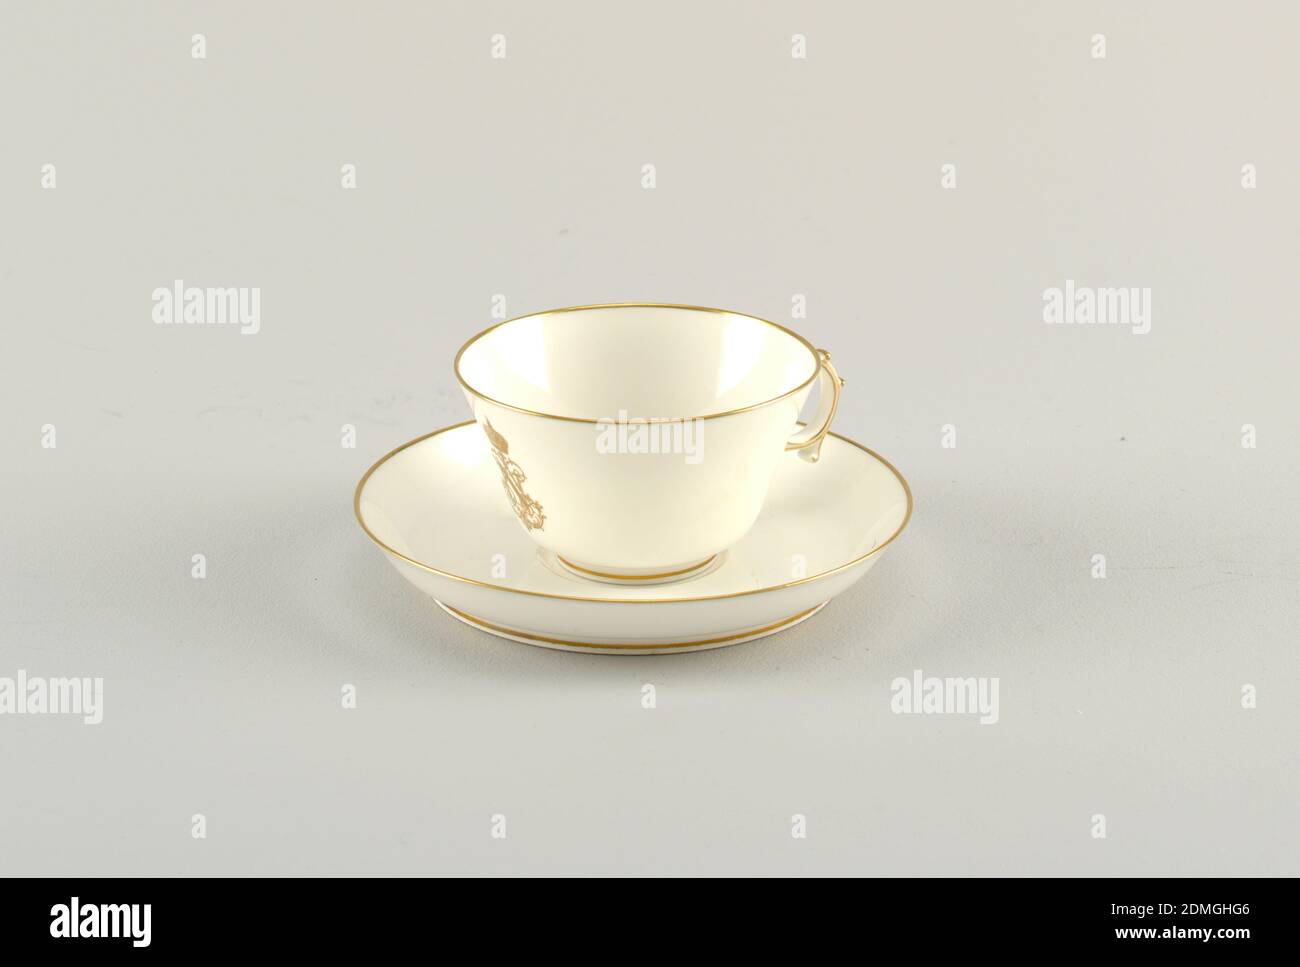 Cup and Saucer, from the Service des Officiers, Sèvres Porcelain Manufactory, French, established 1756 to the present, hard paste porcelain, gold, France, 1849–1856, ceramics, Decorative Arts, cup and saucer, cup and saucer Stock Photo